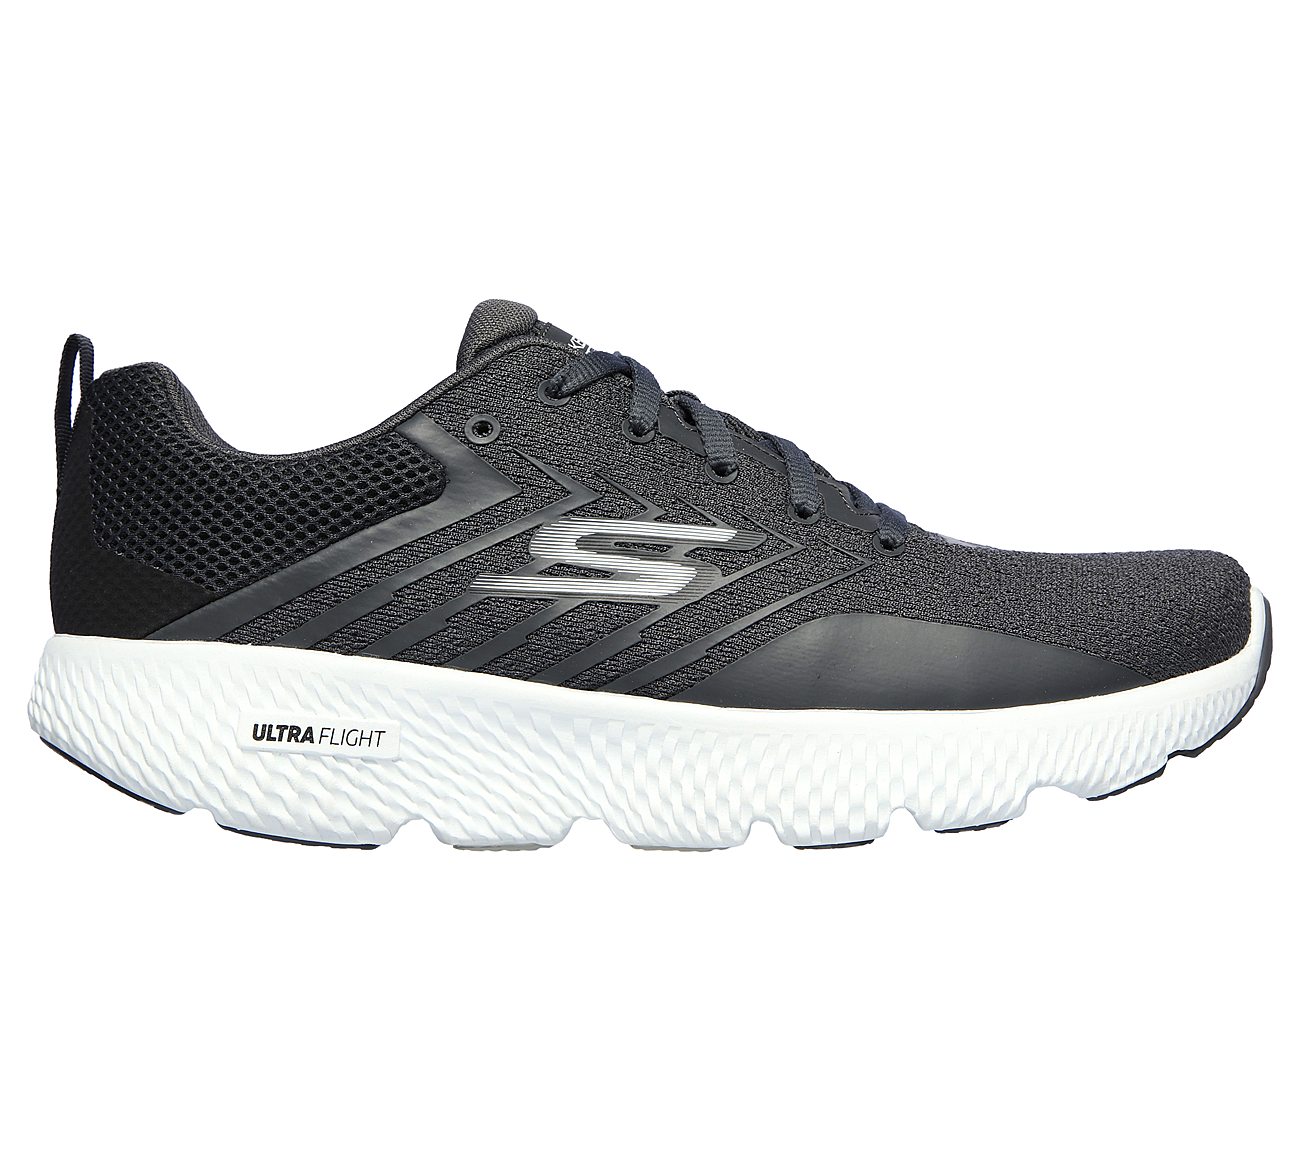 POWER - VOLT, GREY Footwear Lateral View